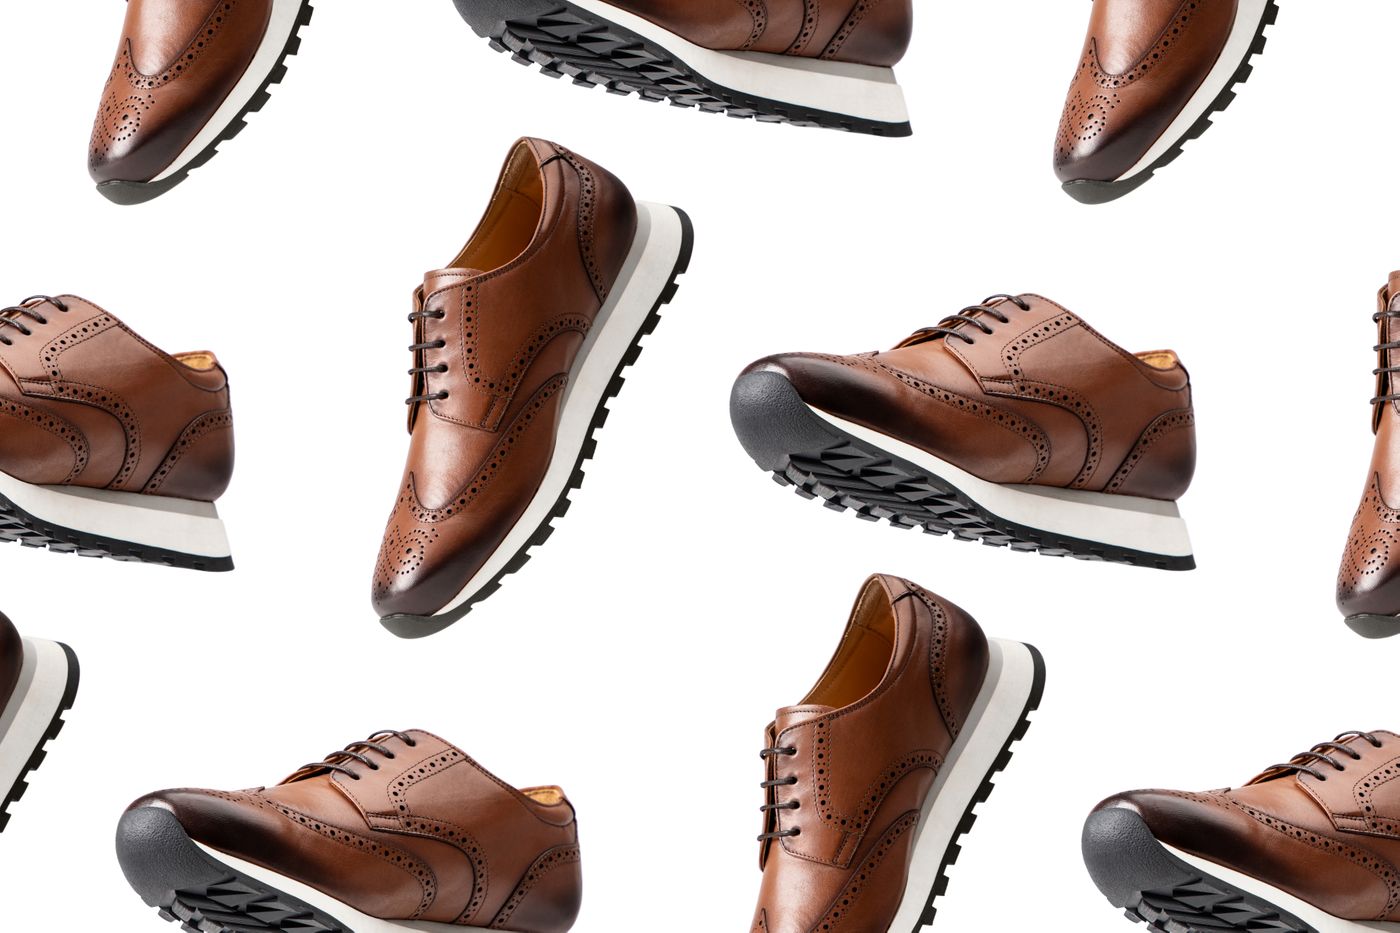 Brogued brown business casual sneakers for men